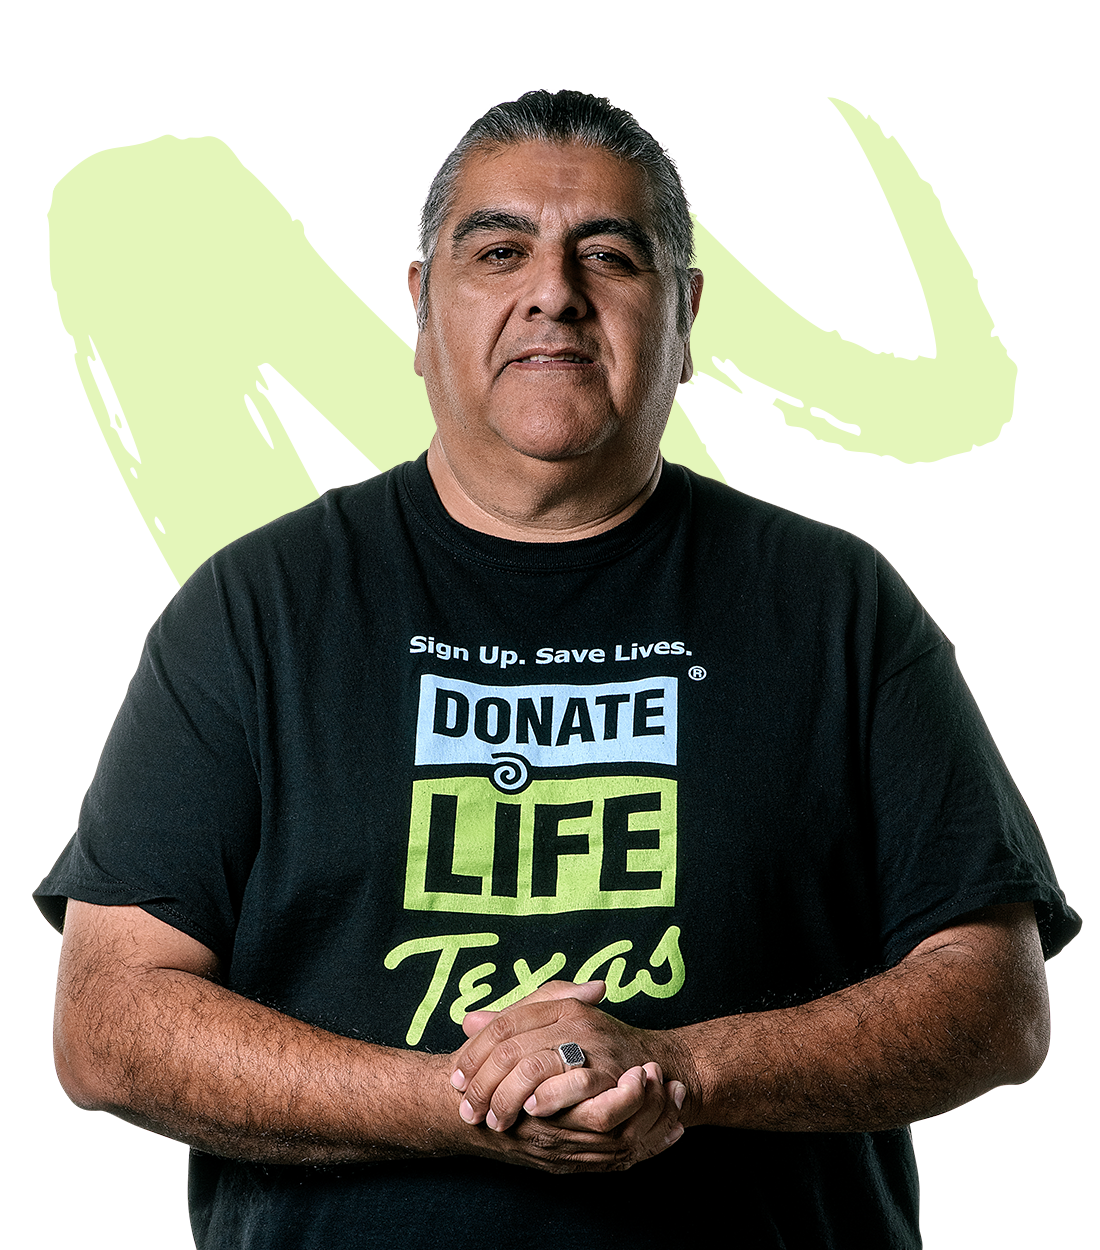 Learn more about Living Organ Donations through Donate Life Texas.